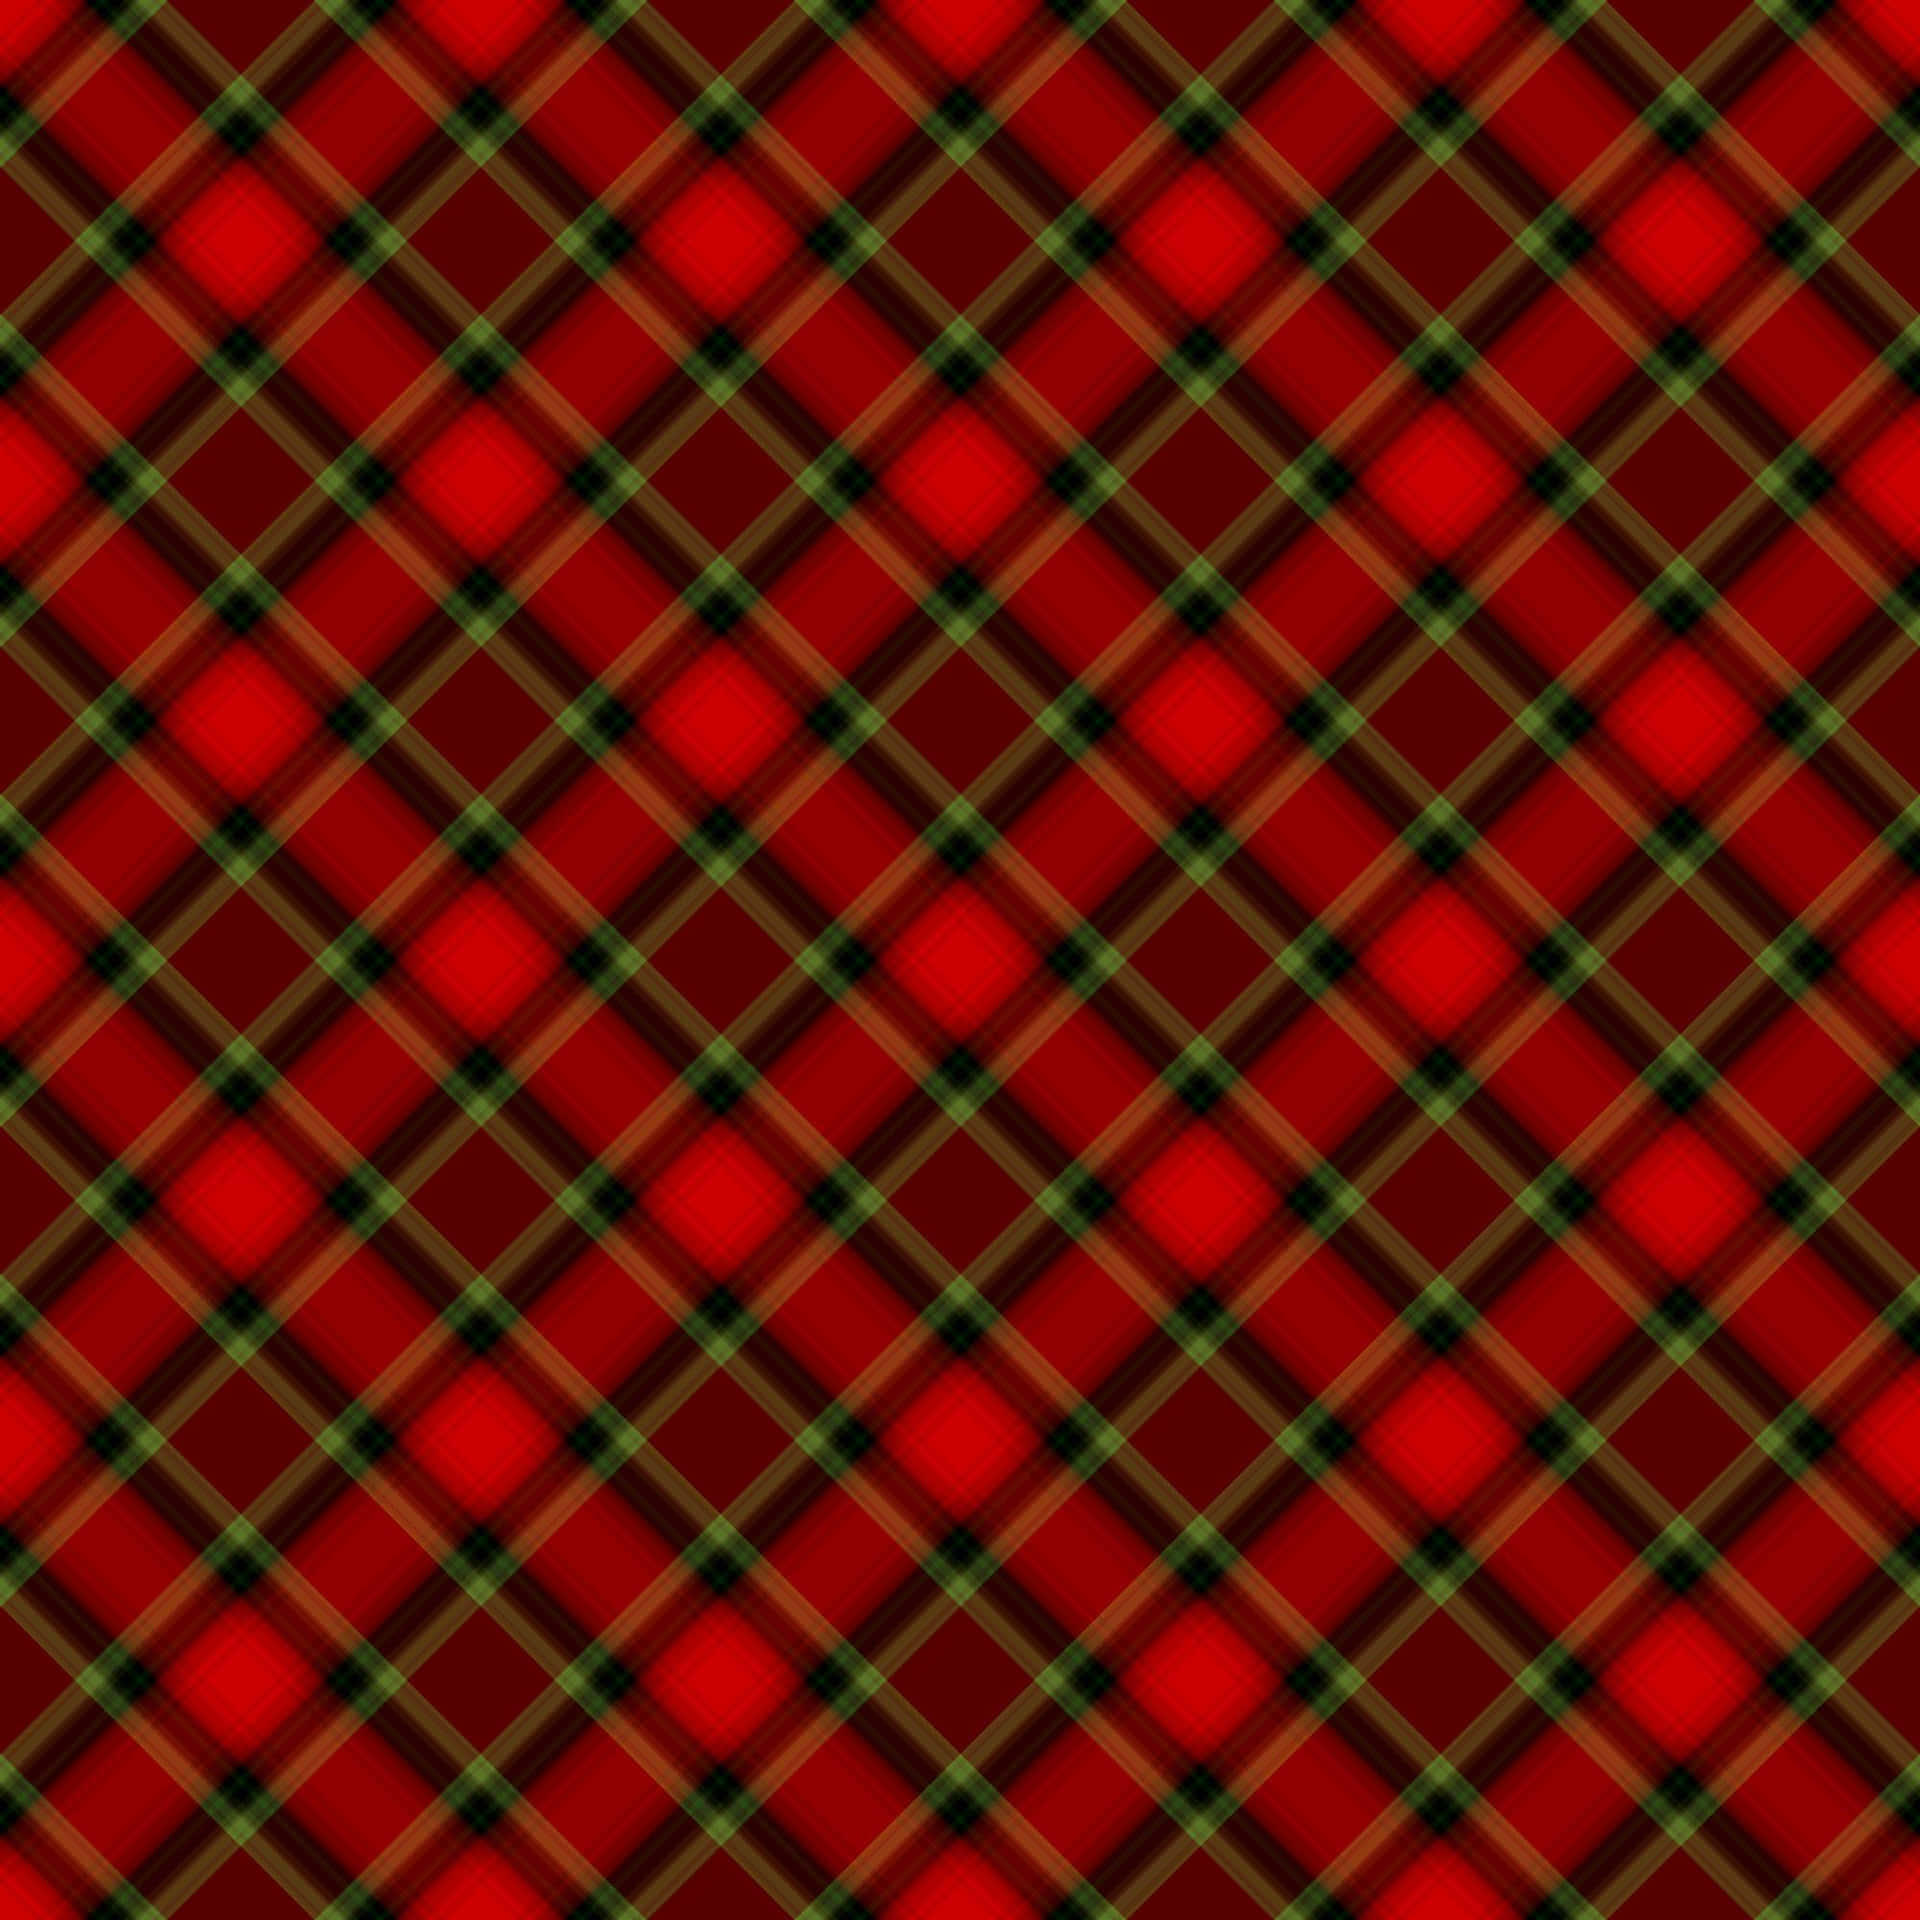 Portrait Plaid Pattern Red And Green Background